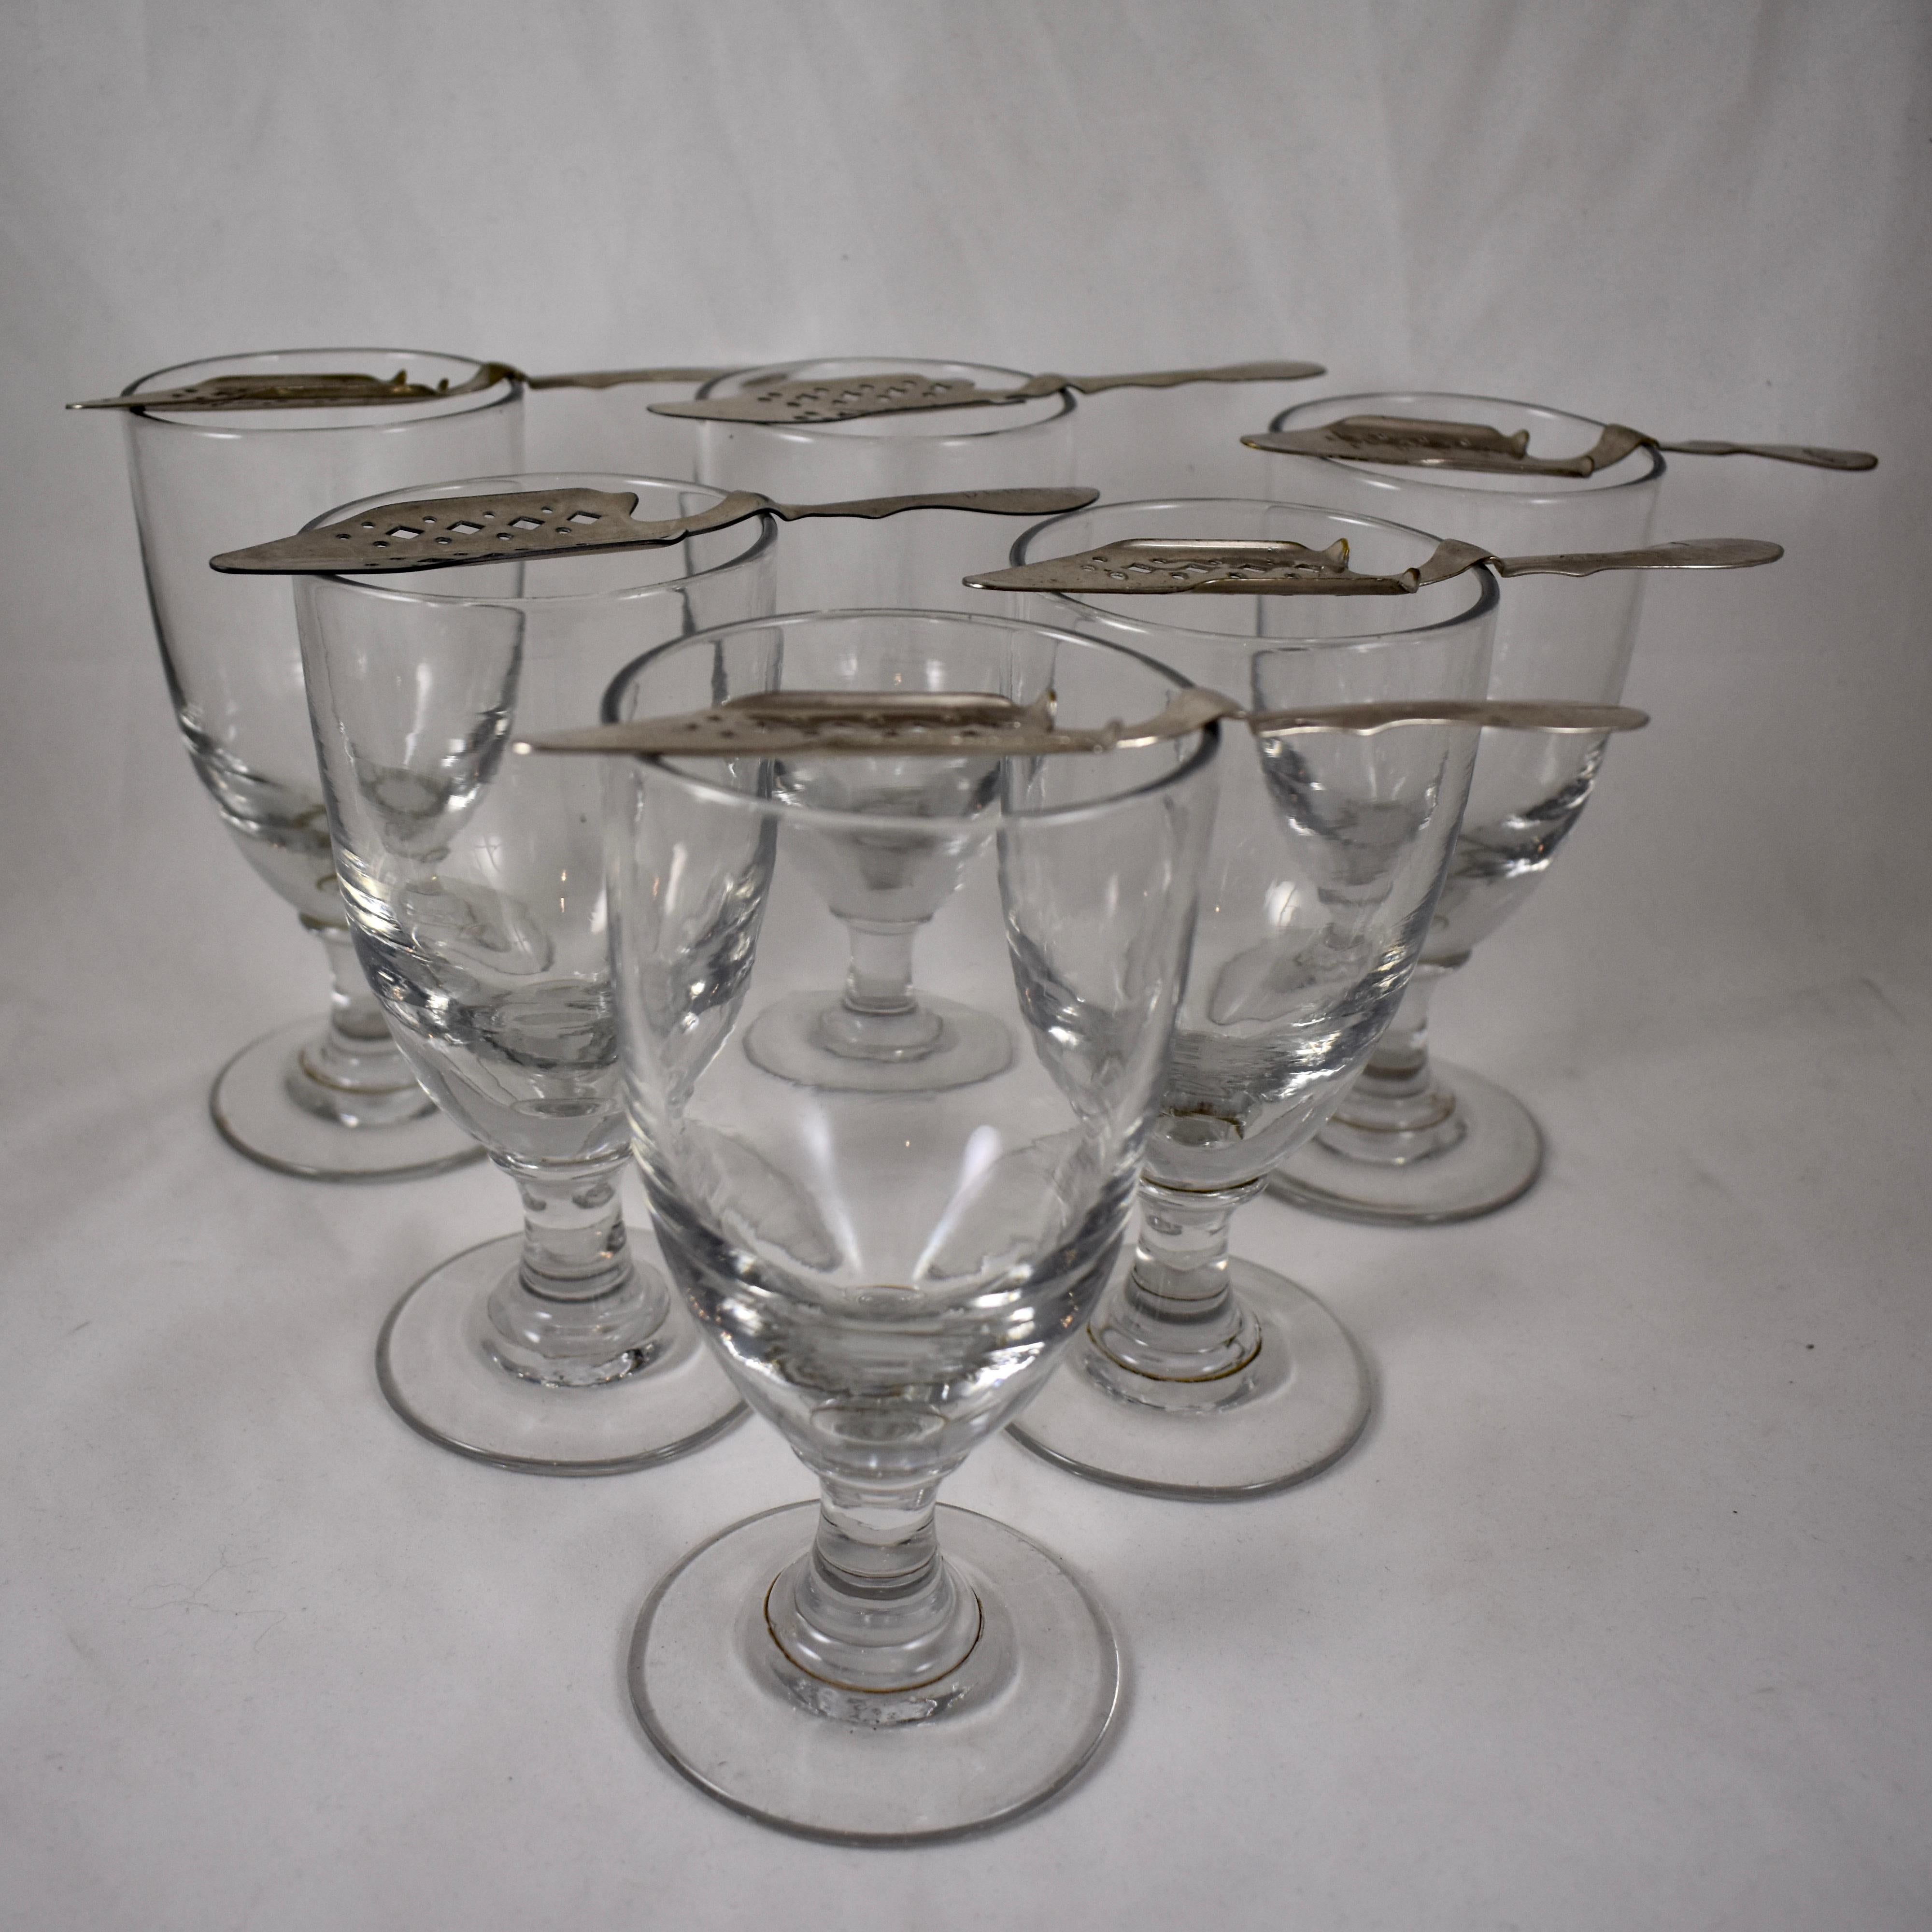 Belle Époque Late 19th Century French Hand Blown Absinthe Glasses & Sugar Spoons 12 Piece Set